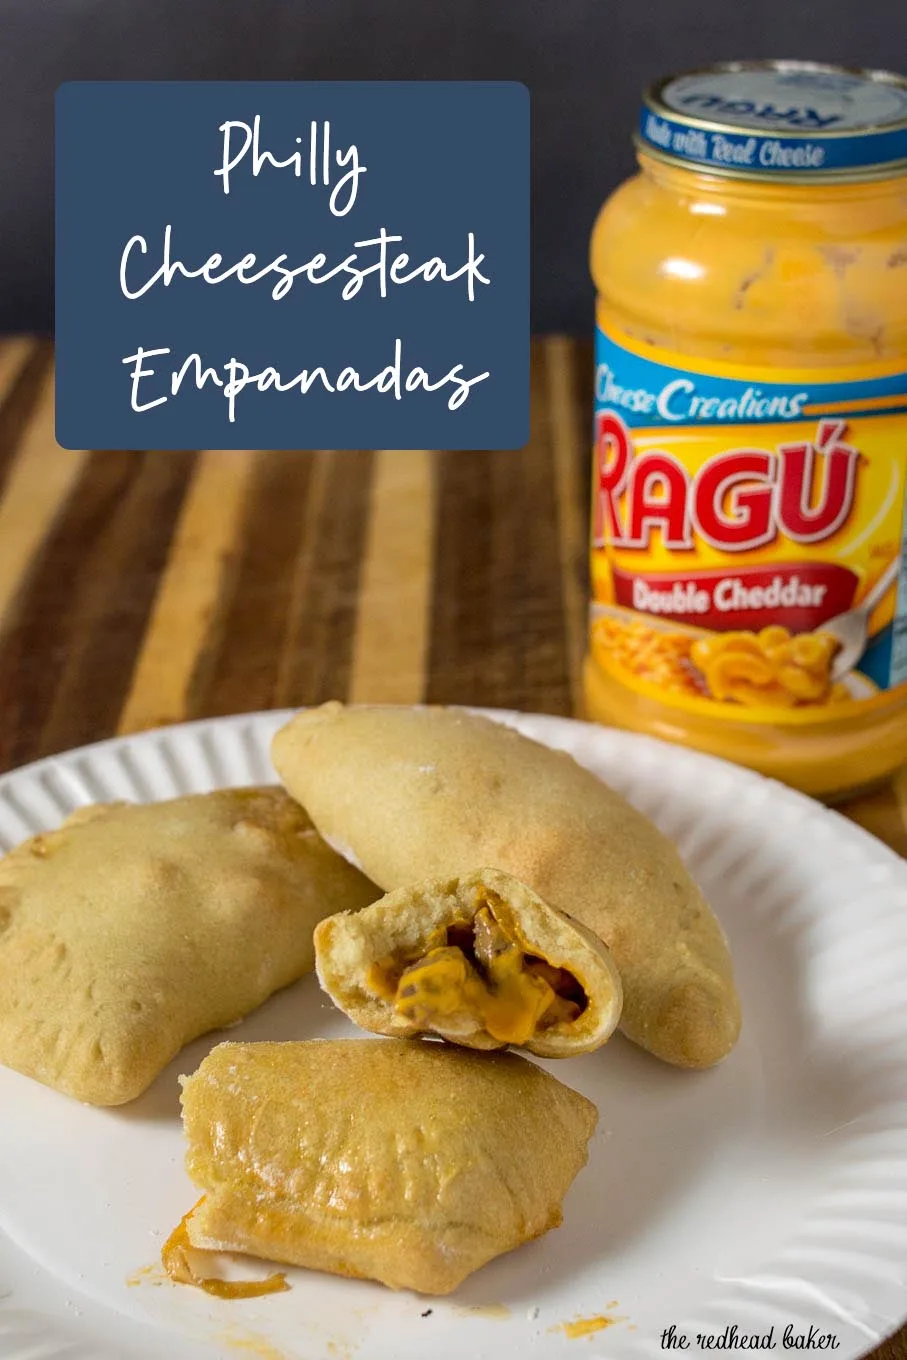 A plate of Philly cheesesteak empanadas with a jar of Ragu Double Cheddar Sauce.